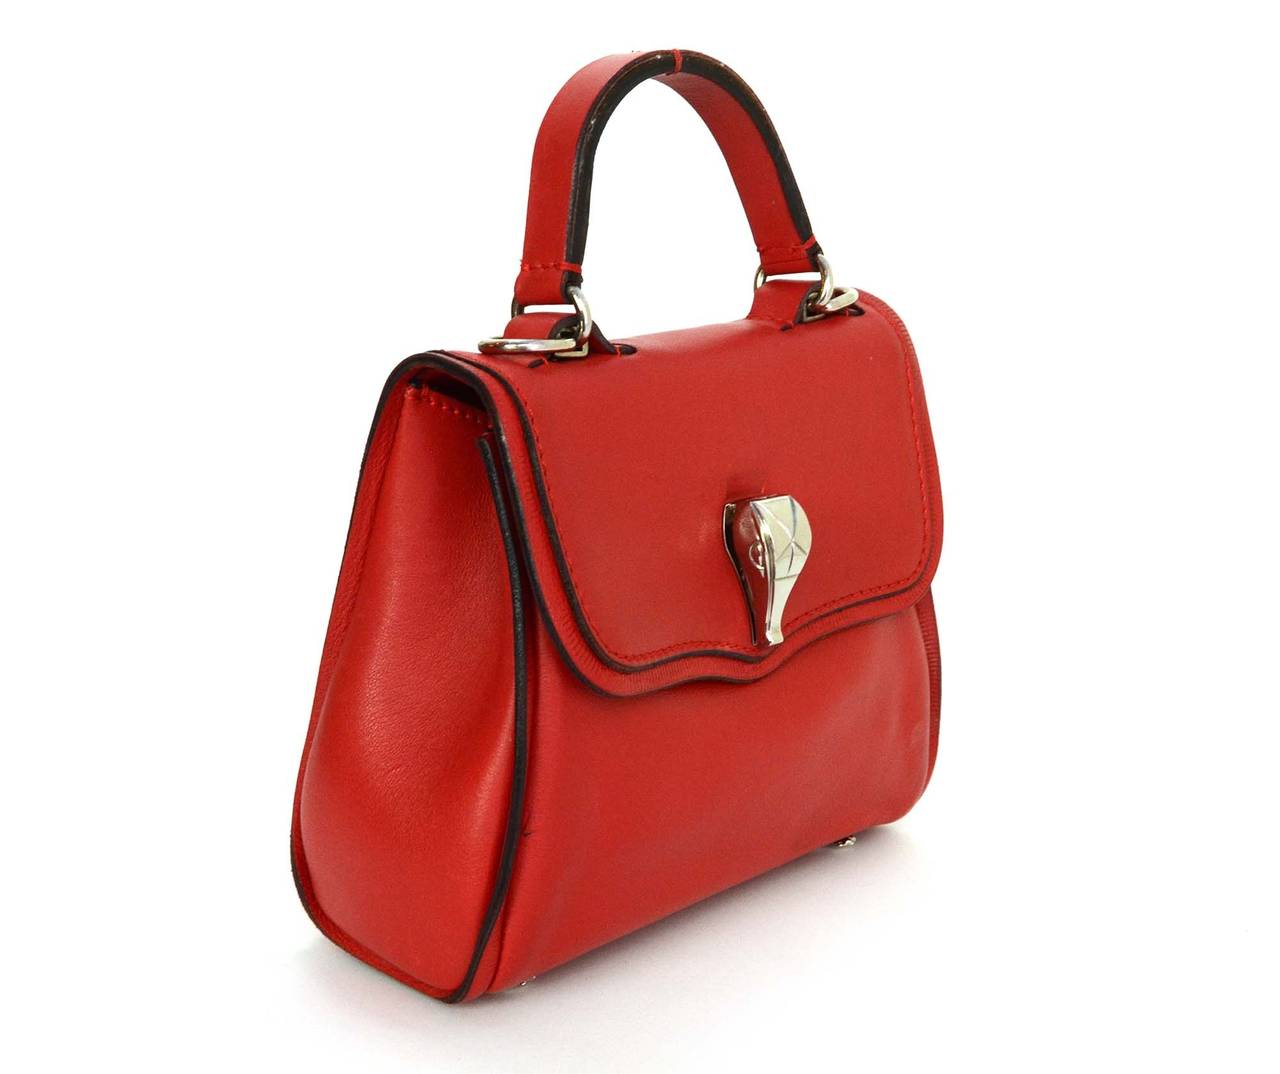 Kieselstein-Cord Red Leather Small Satchel
Features small silvertone alligator accent on front of bag
Made in: Italy
Color: Red and silvertone
Hardware: Silvertone
Materials: Leather and metal
Lining: Red leather
Closure/opening: Flap top